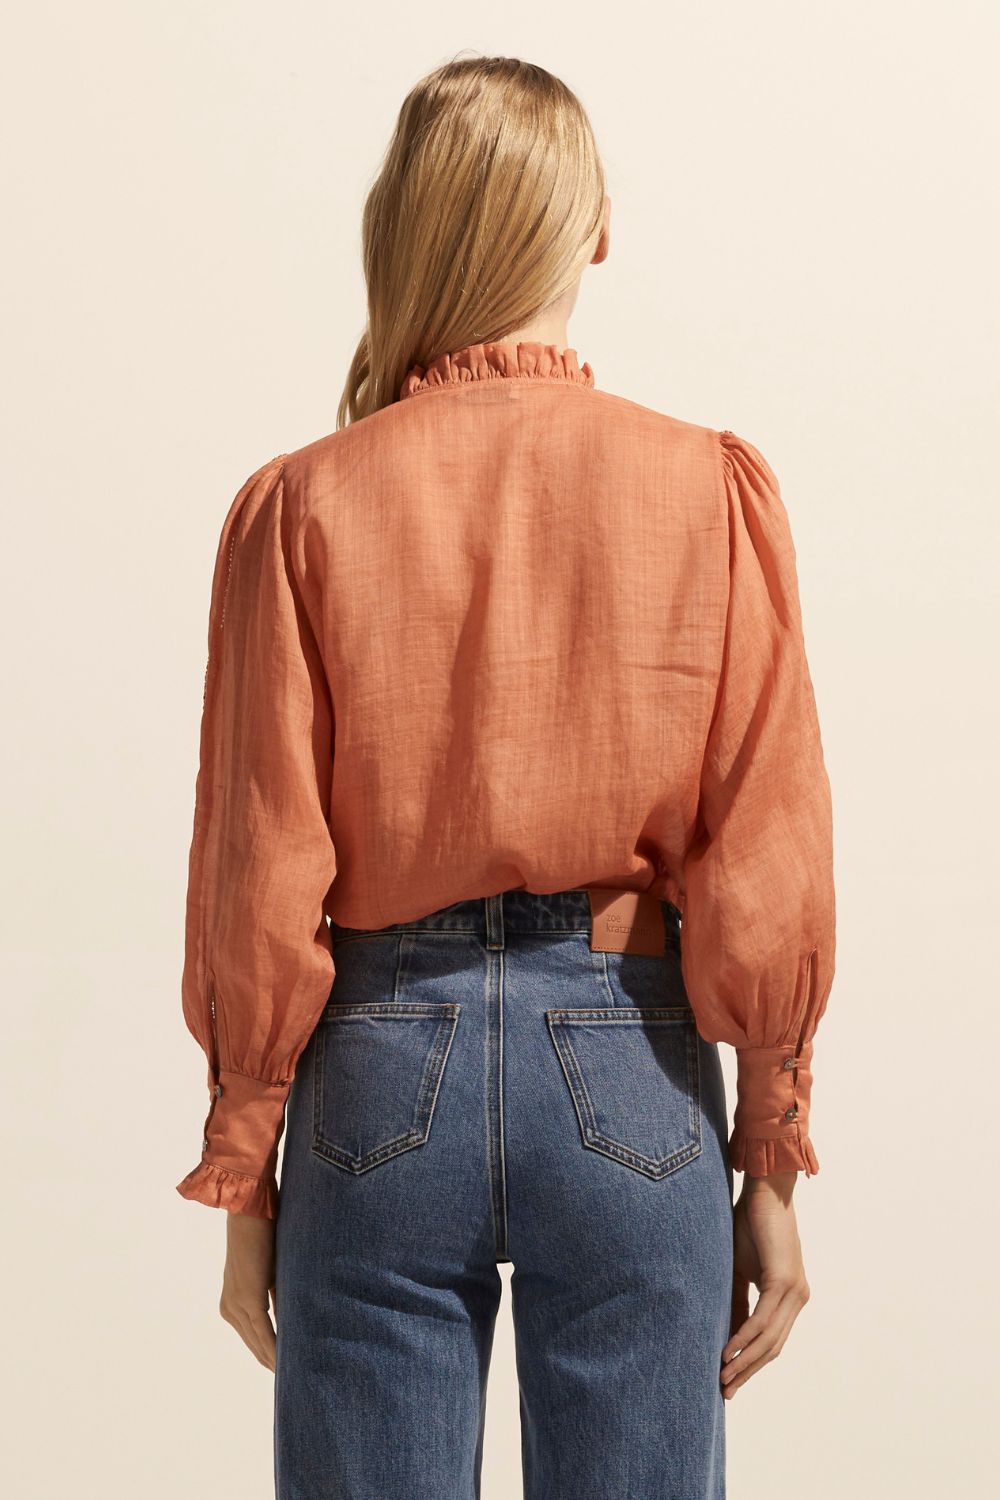 Swoon top - Apricot